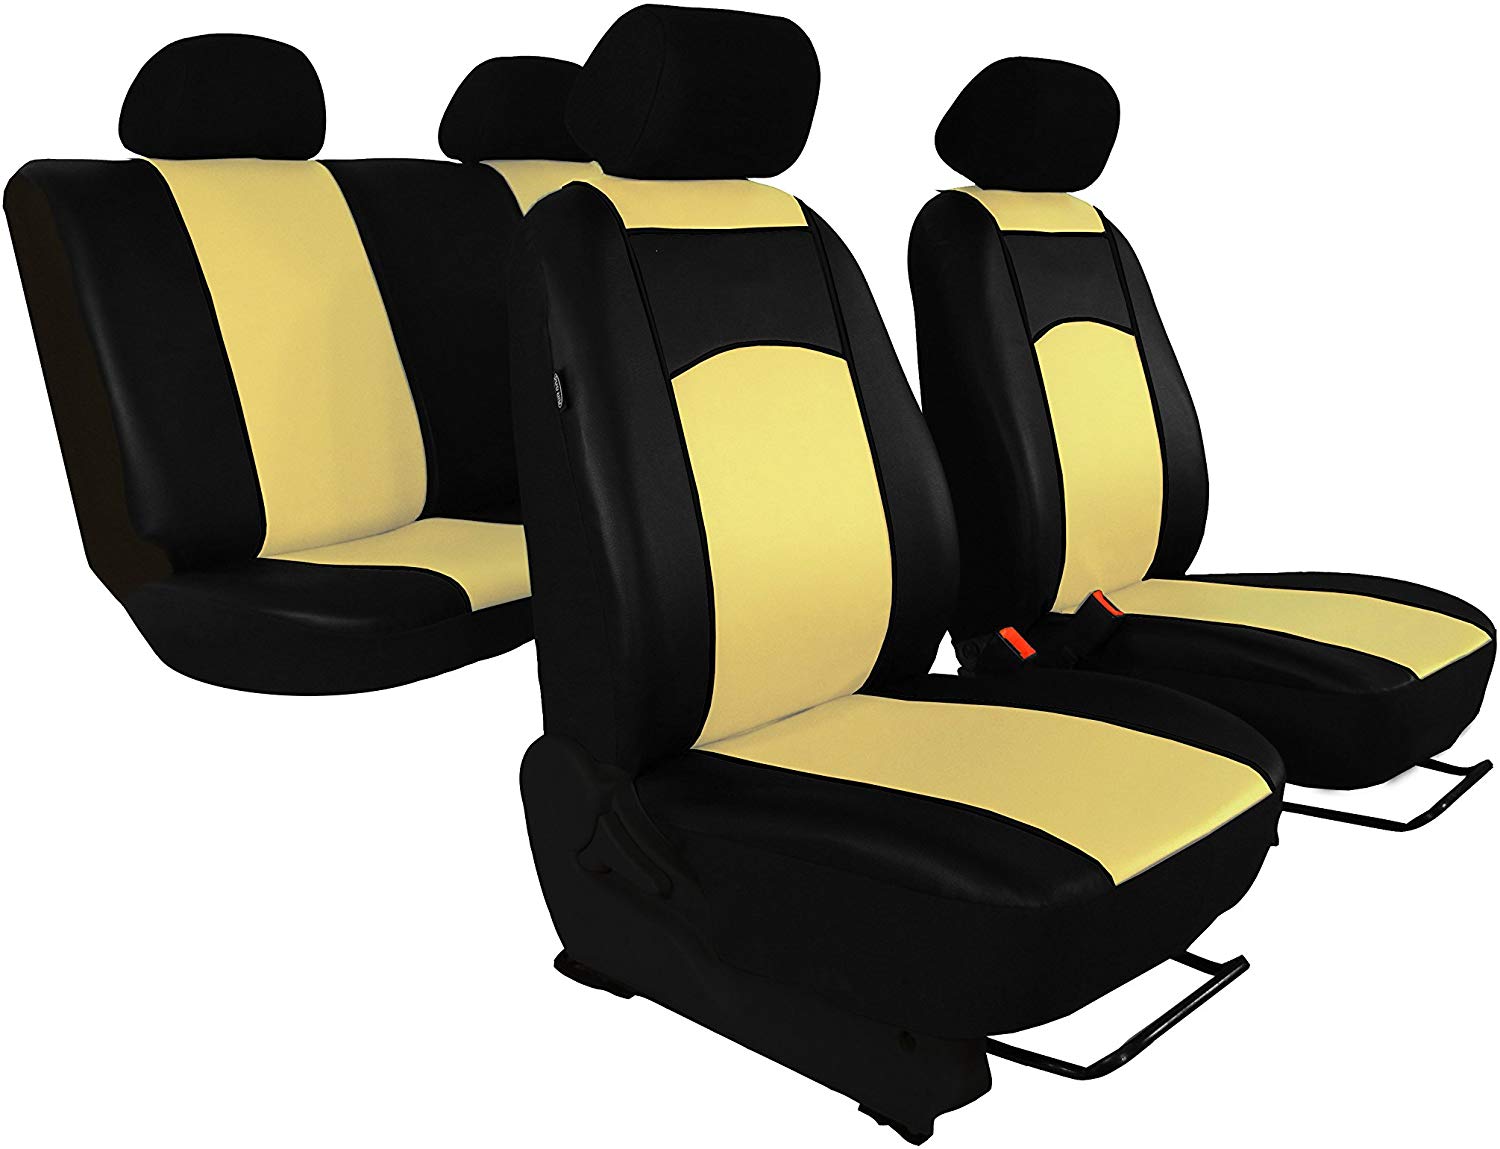 POK-TER-TUNING For up! 5-door high-quality, custom-fit seat covers, protective covers, faux leather, 7 colours